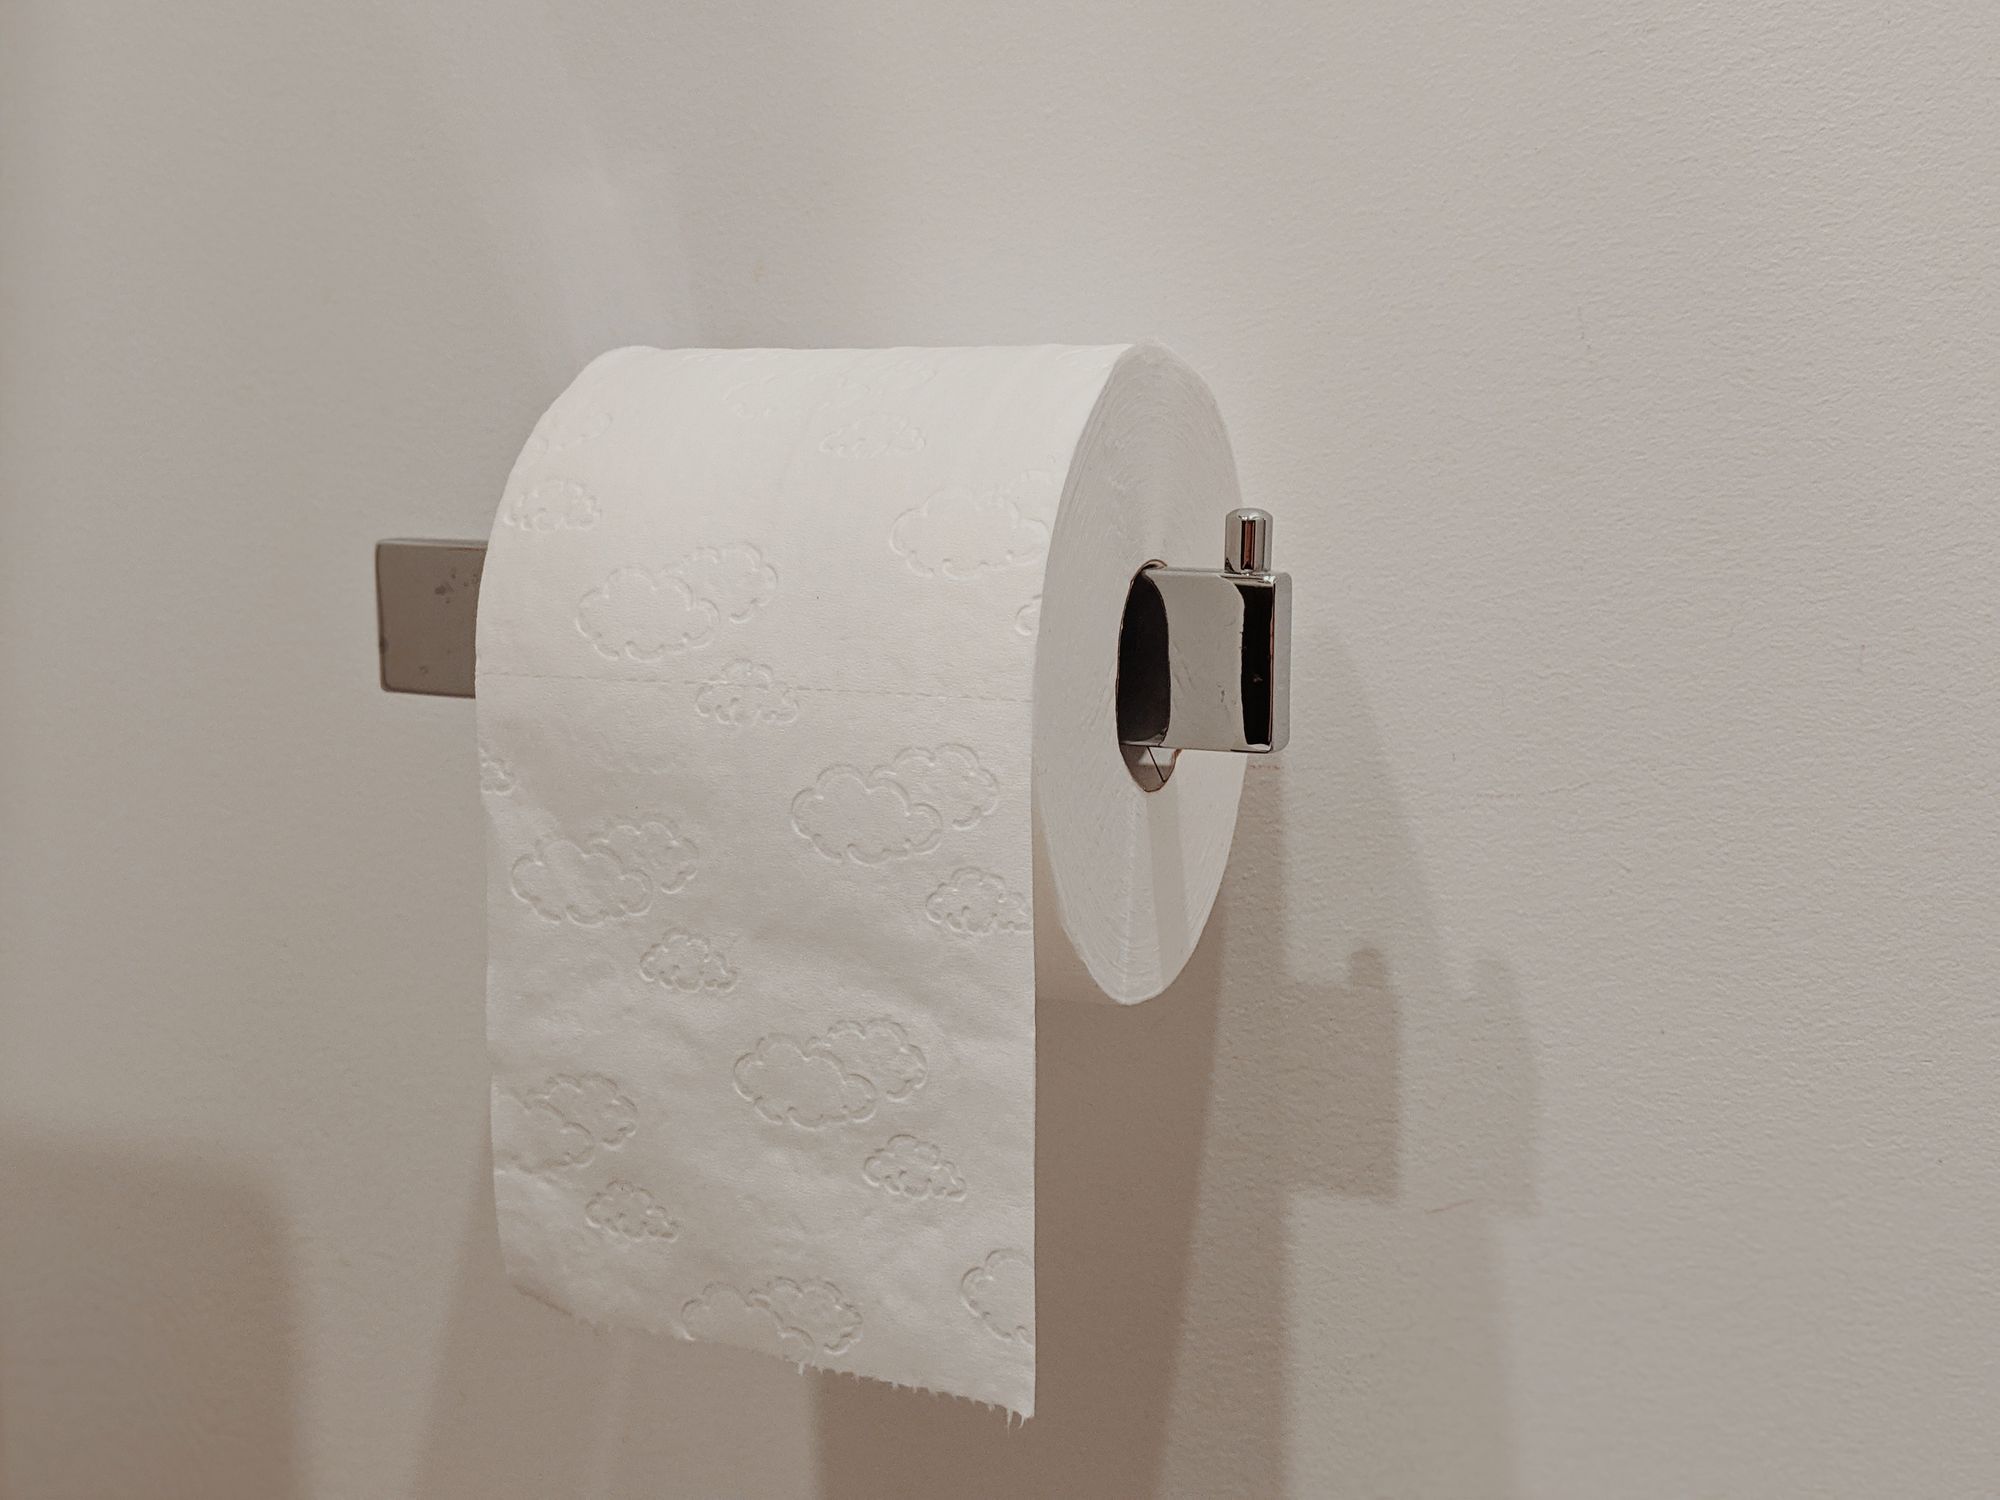 A toilet paper holder.